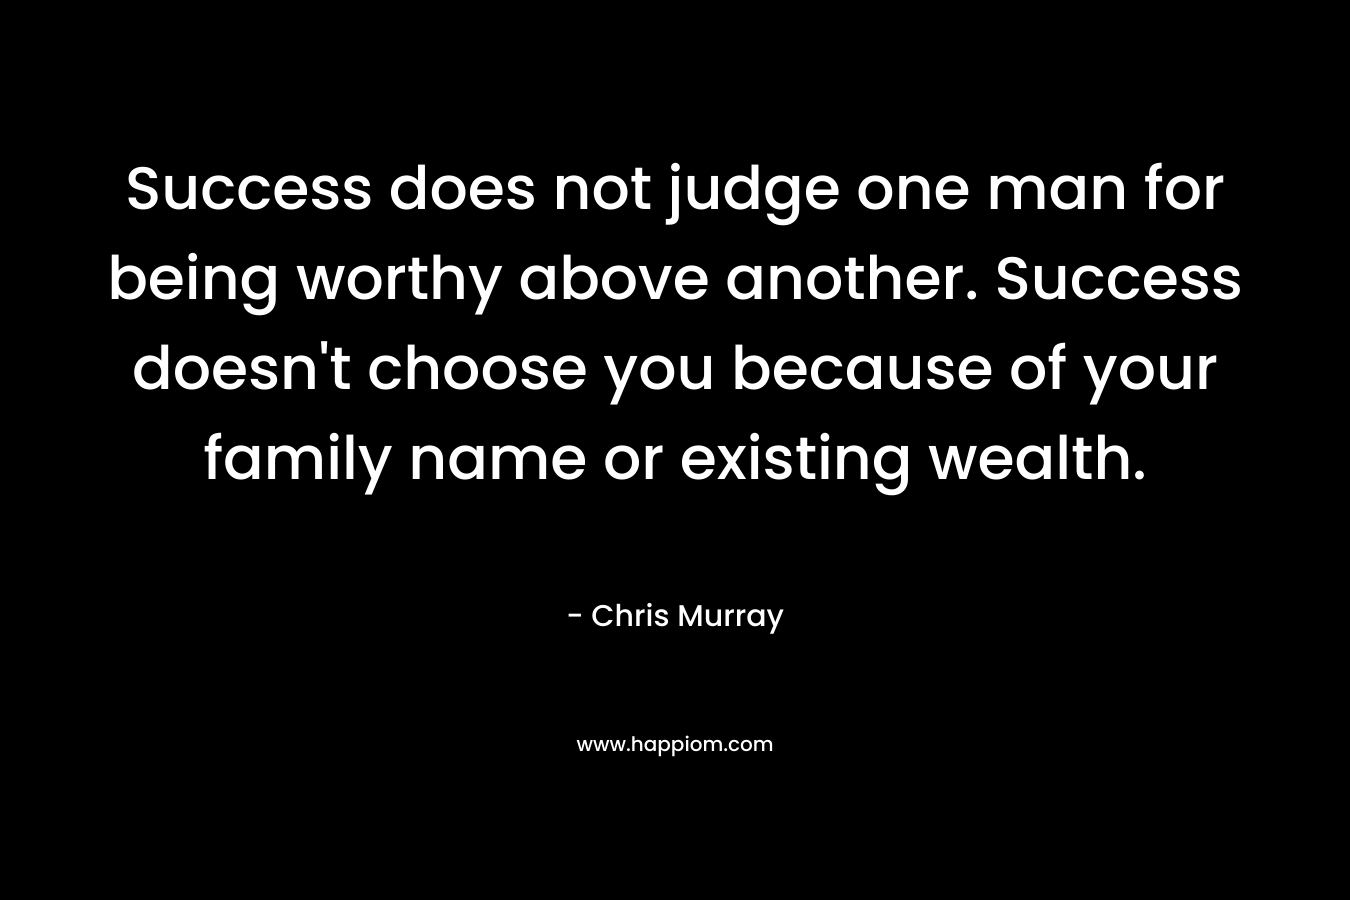 Success does not judge one man for being worthy above another. Success doesn’t choose you because of your family name or existing wealth. – Chris Murray